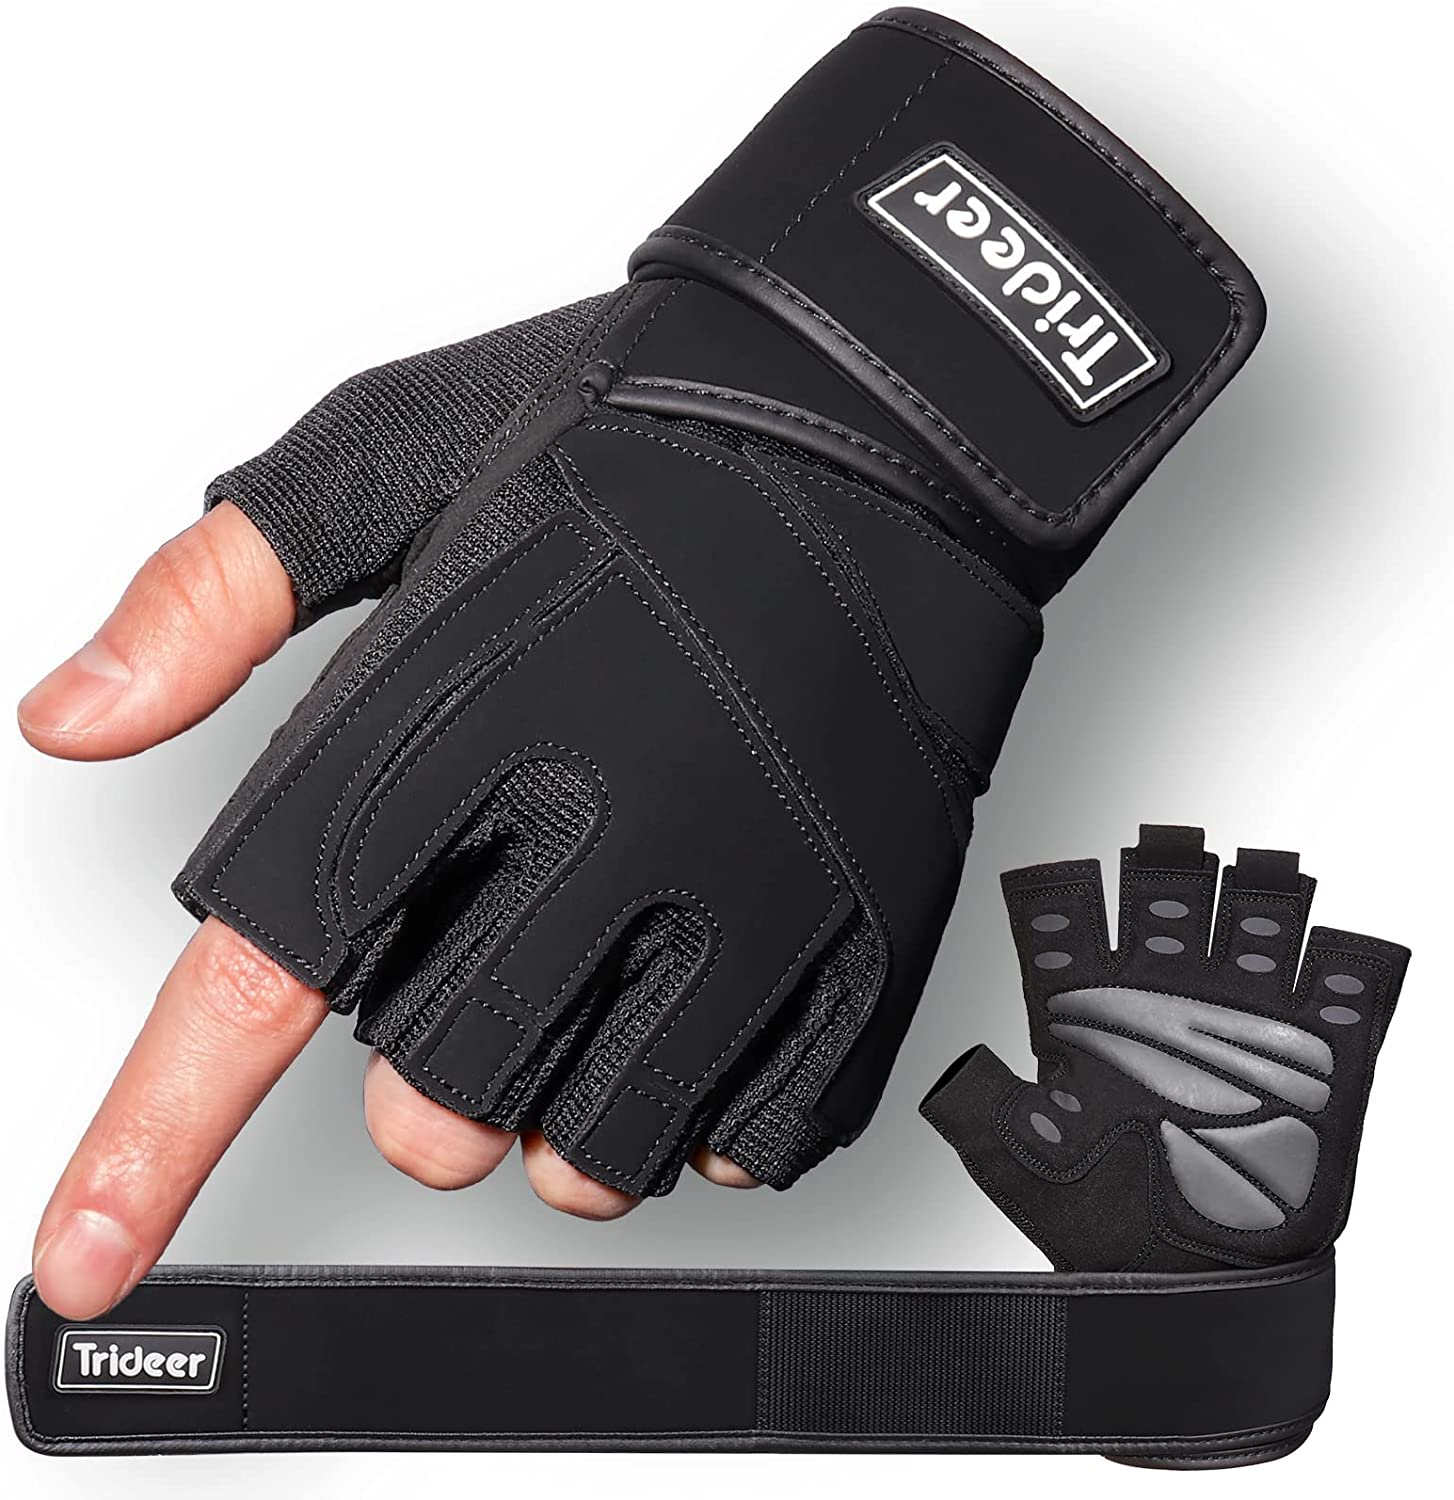 Trideer Padded Workout Gloves - Amazon